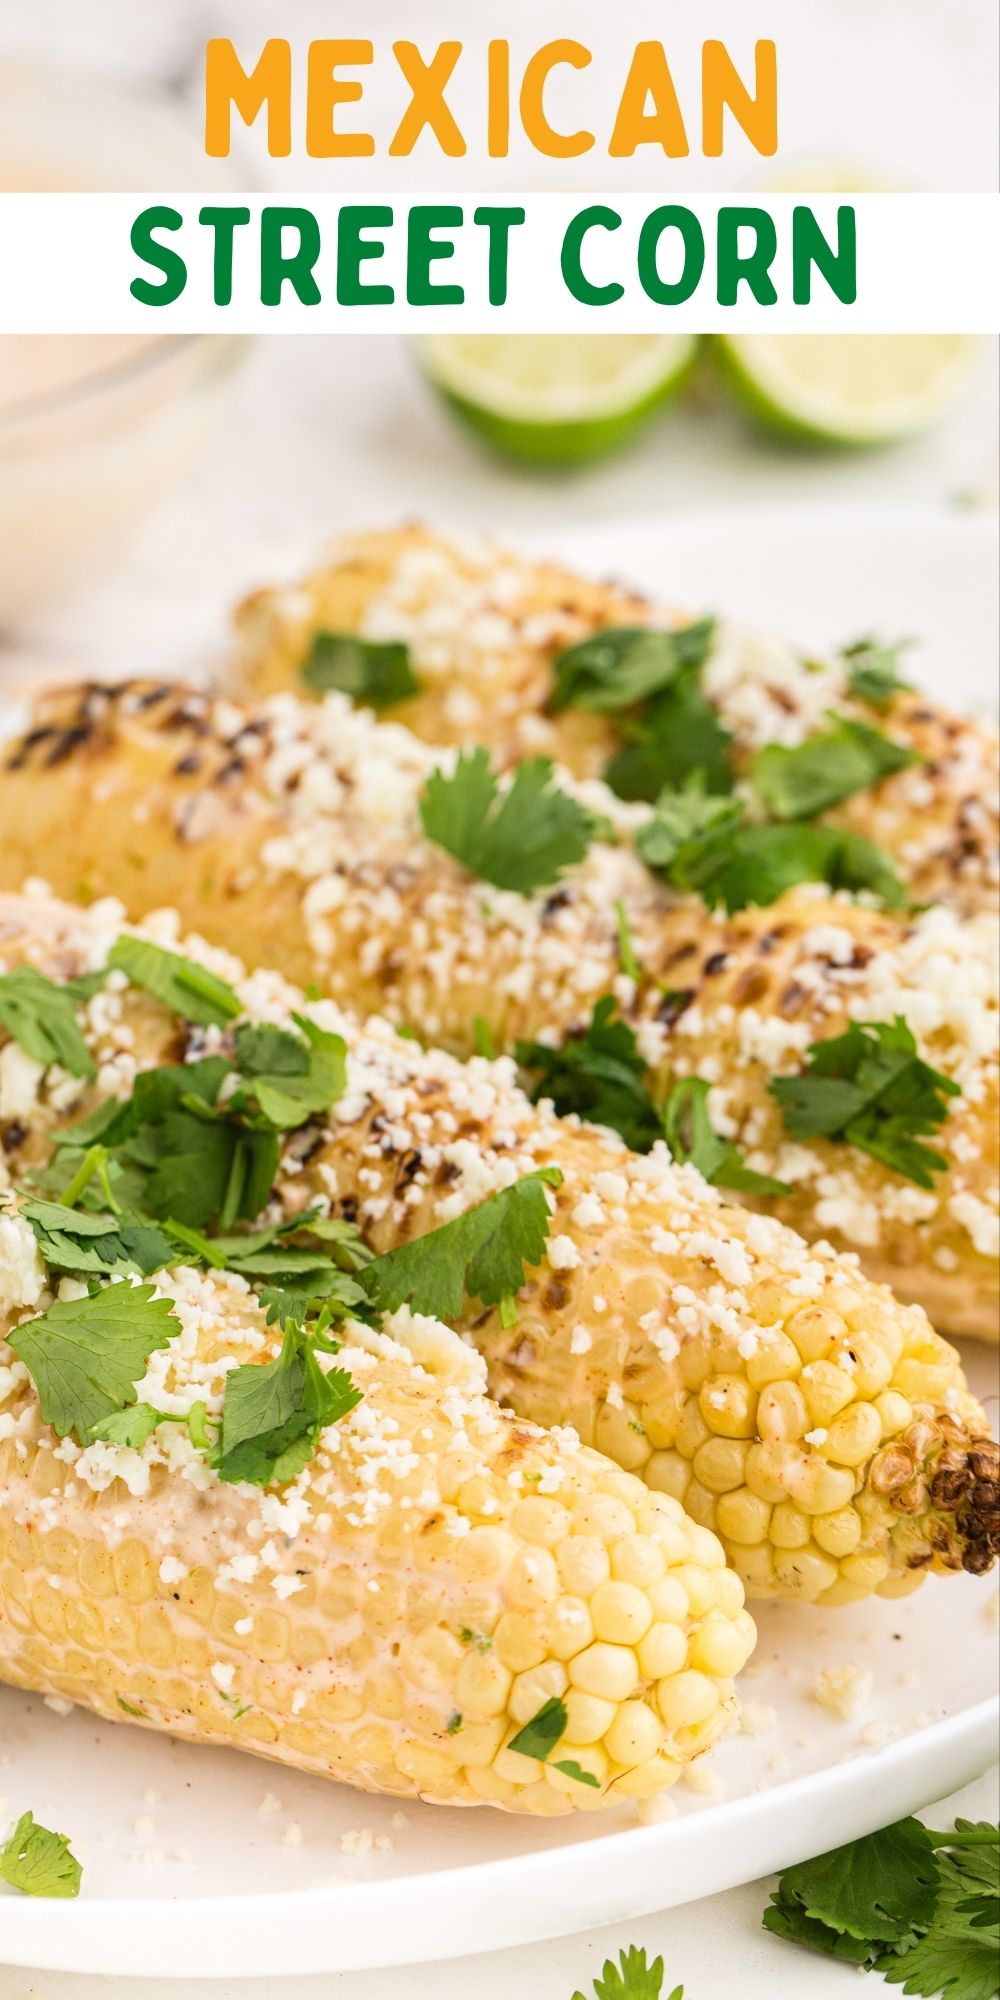 This corn is brushed with a spicy sauce, sprinkled with Cotija and fresh cilantro, they’re just like the full Mexican Street Corn experience. via @familyfresh